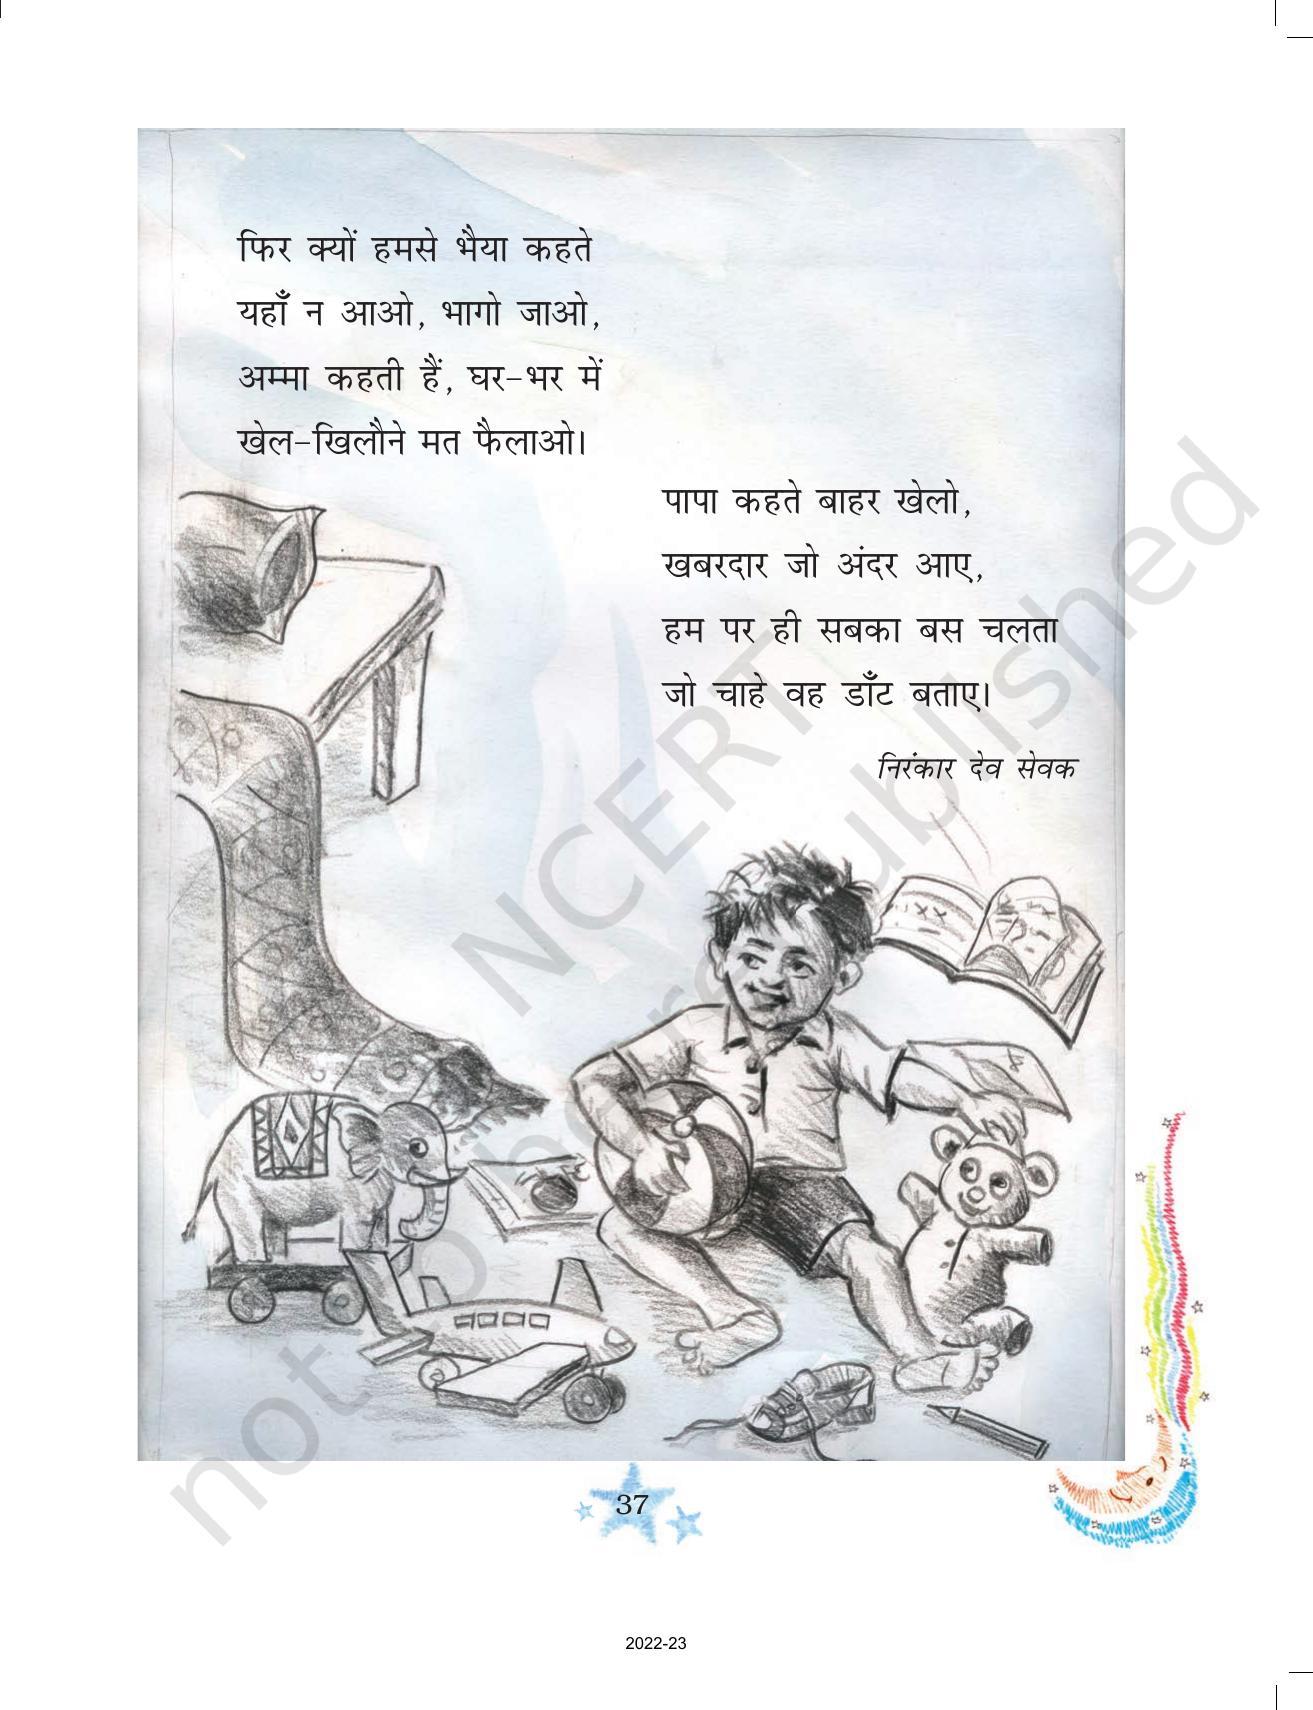 NCERT Book for Class 3 Hindi Chapter 5-हमसे सब कहते - Page 2